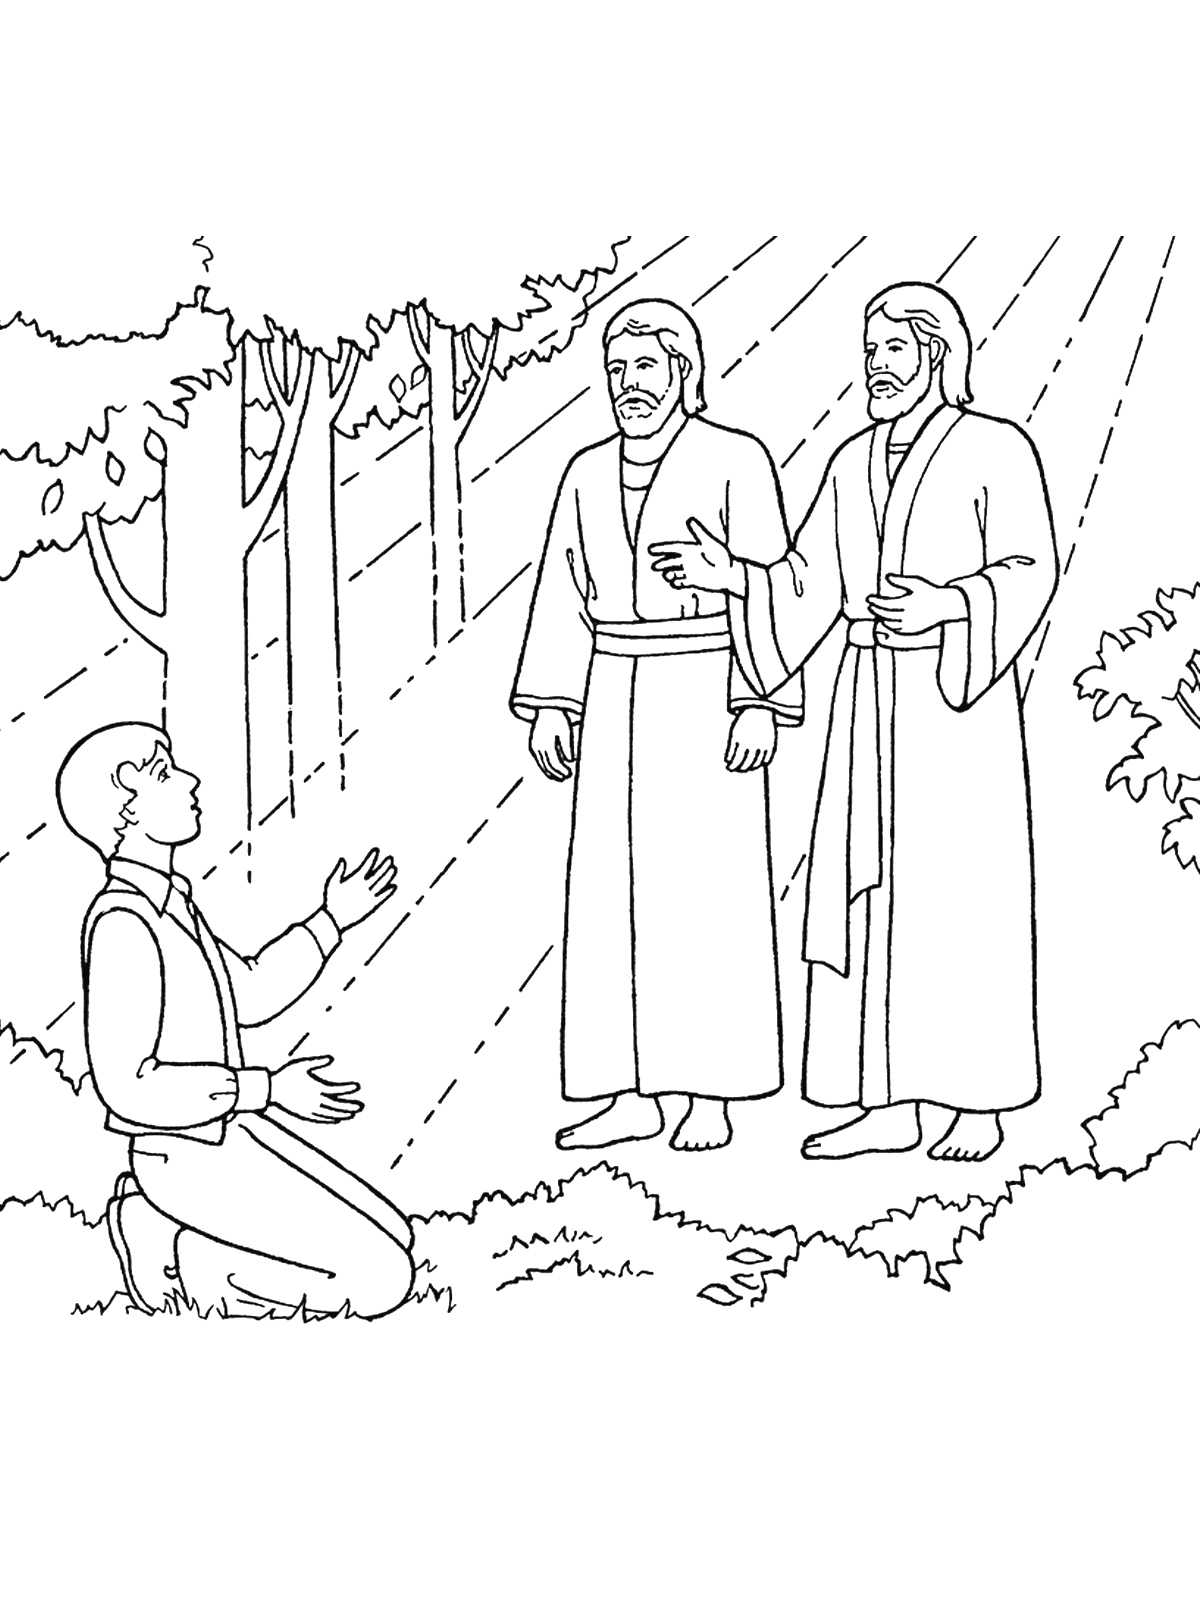 Lds Holy Ghost Coloring Page Lds Coloring Pages 13722 25503300 Coloriorinfo